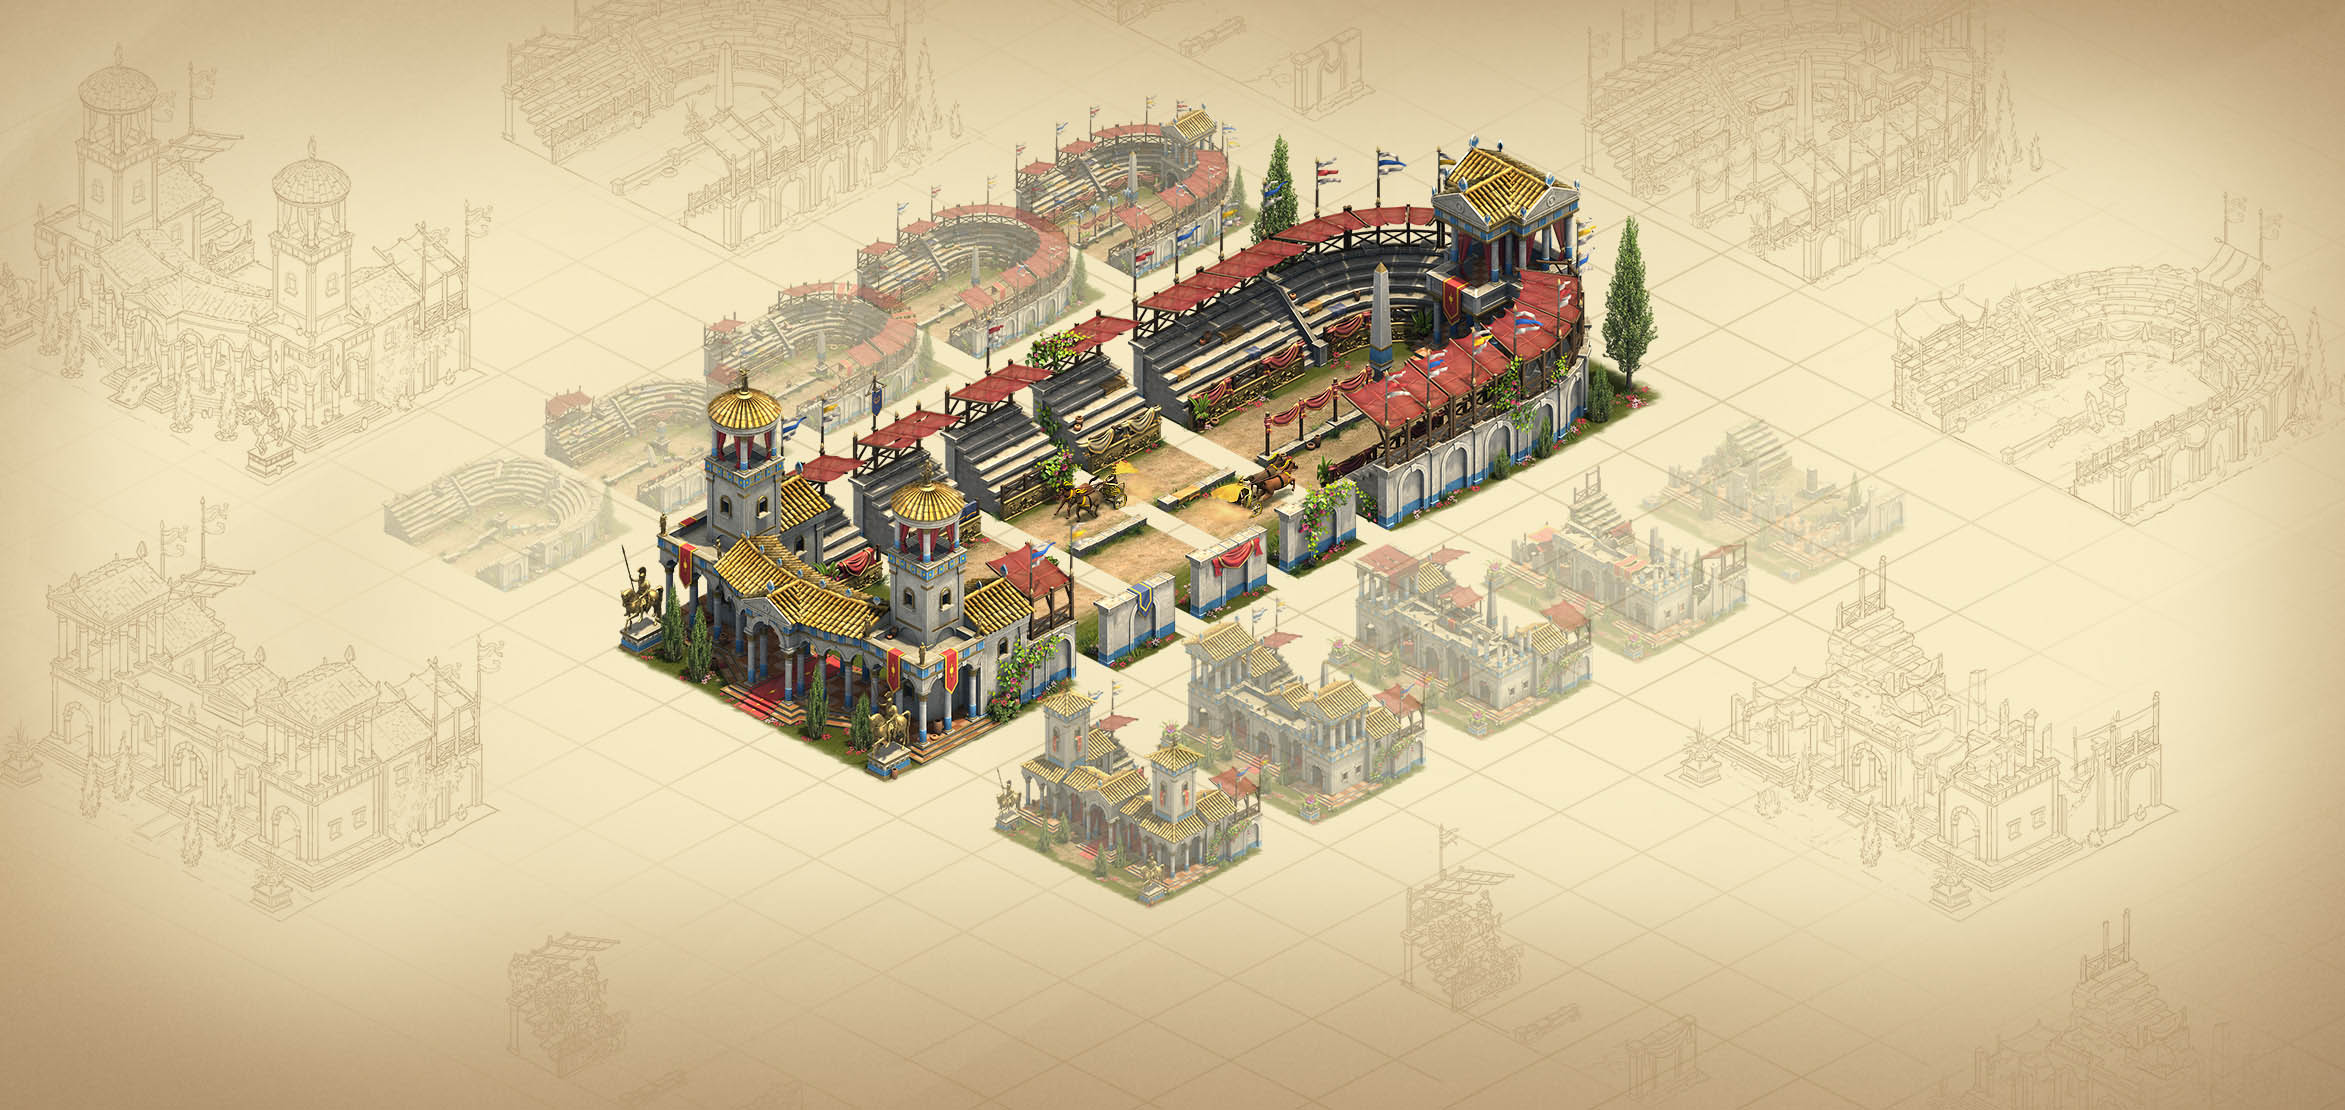 archaeology event | forge of empires wiki | fandom powered